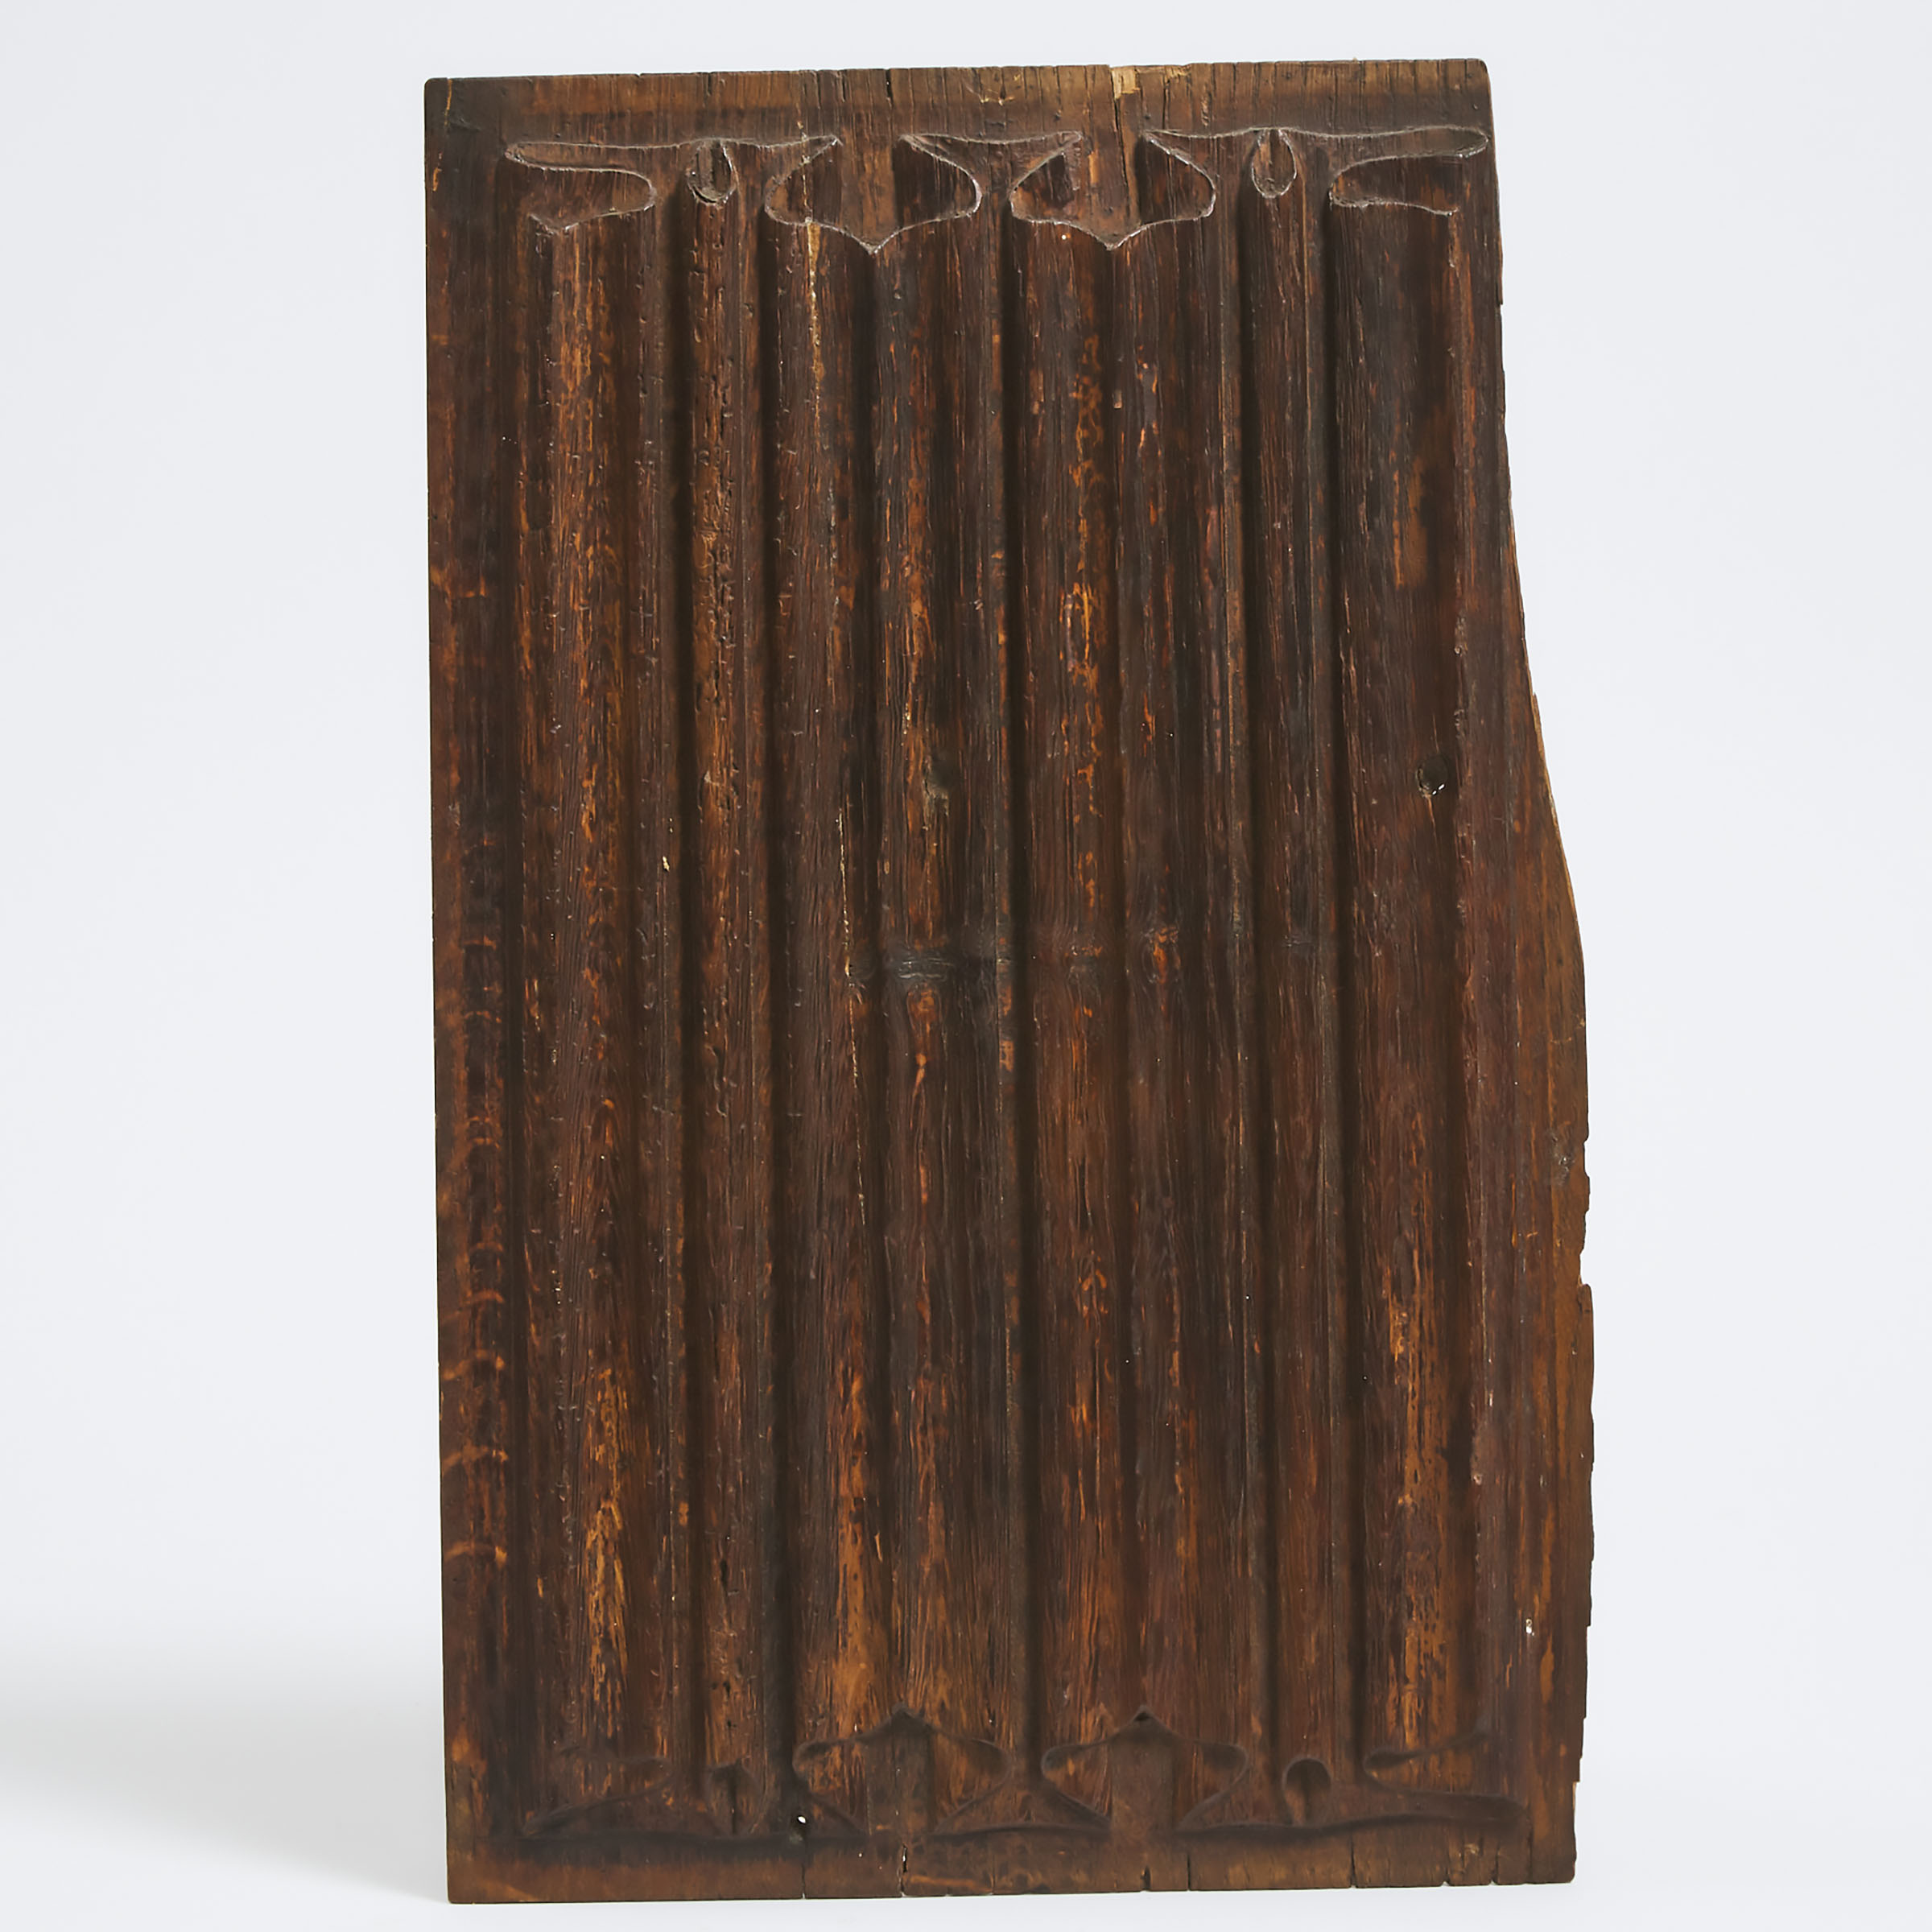 English Relief Carved Oak Linen Fold Panel, 16th century